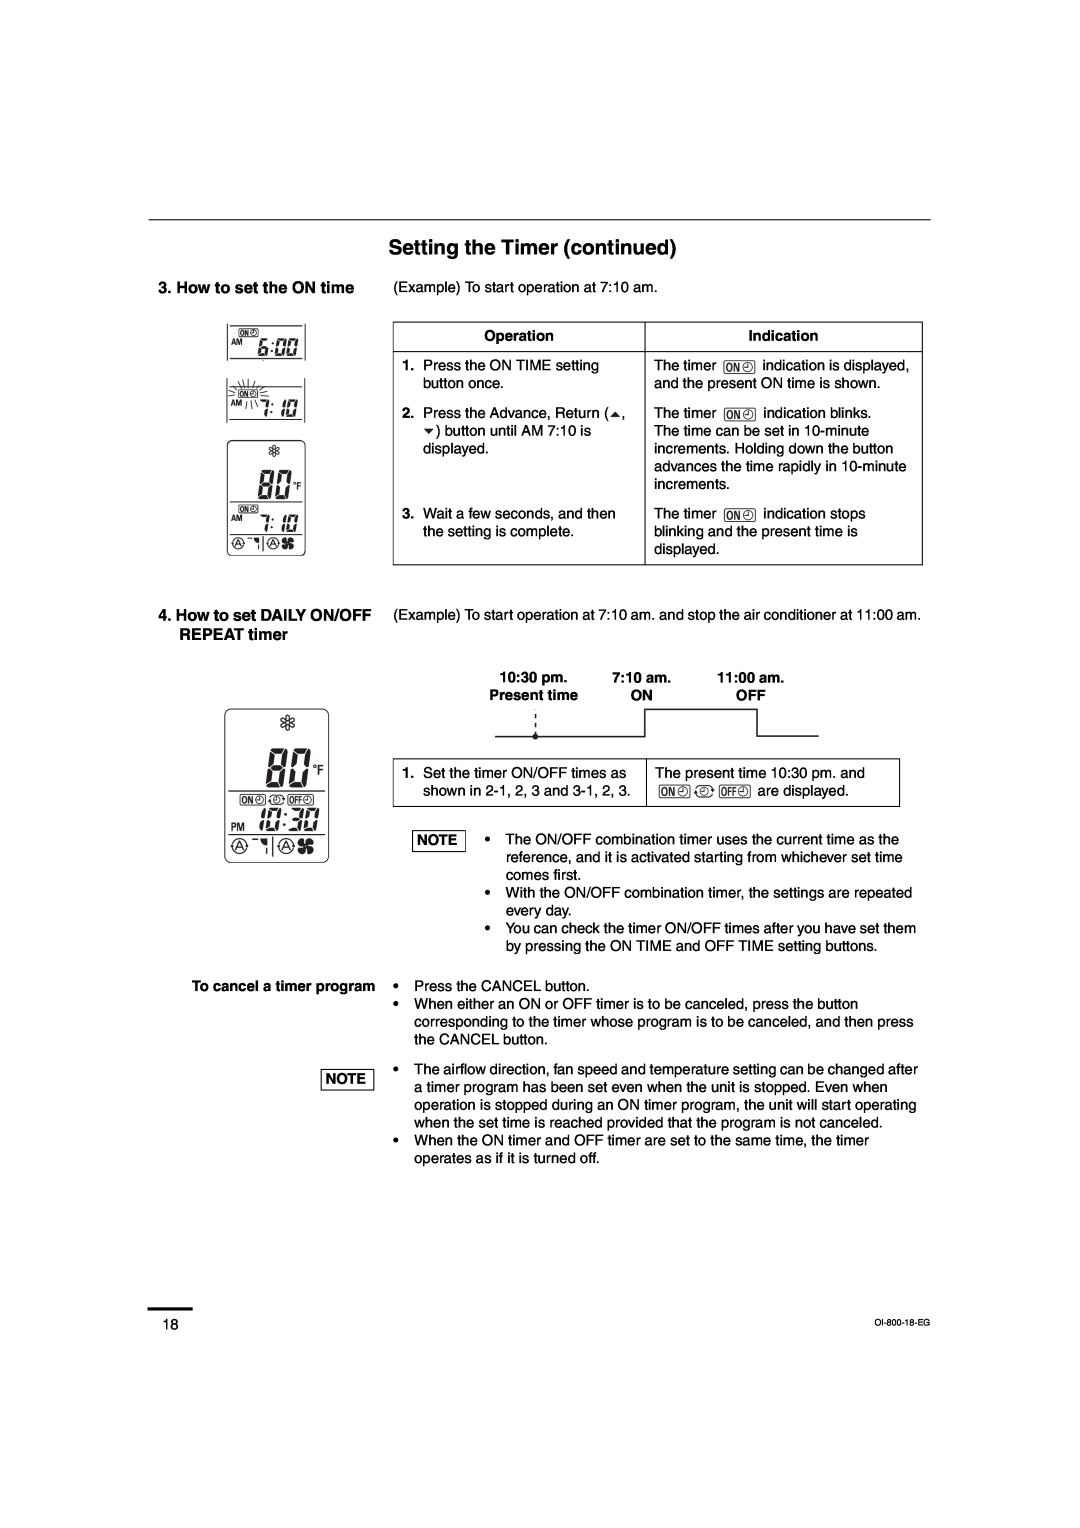 Sanyo C1872, C2472, CL2472, CL1872 service manual Setting the Timer continued, REPEAT timer 